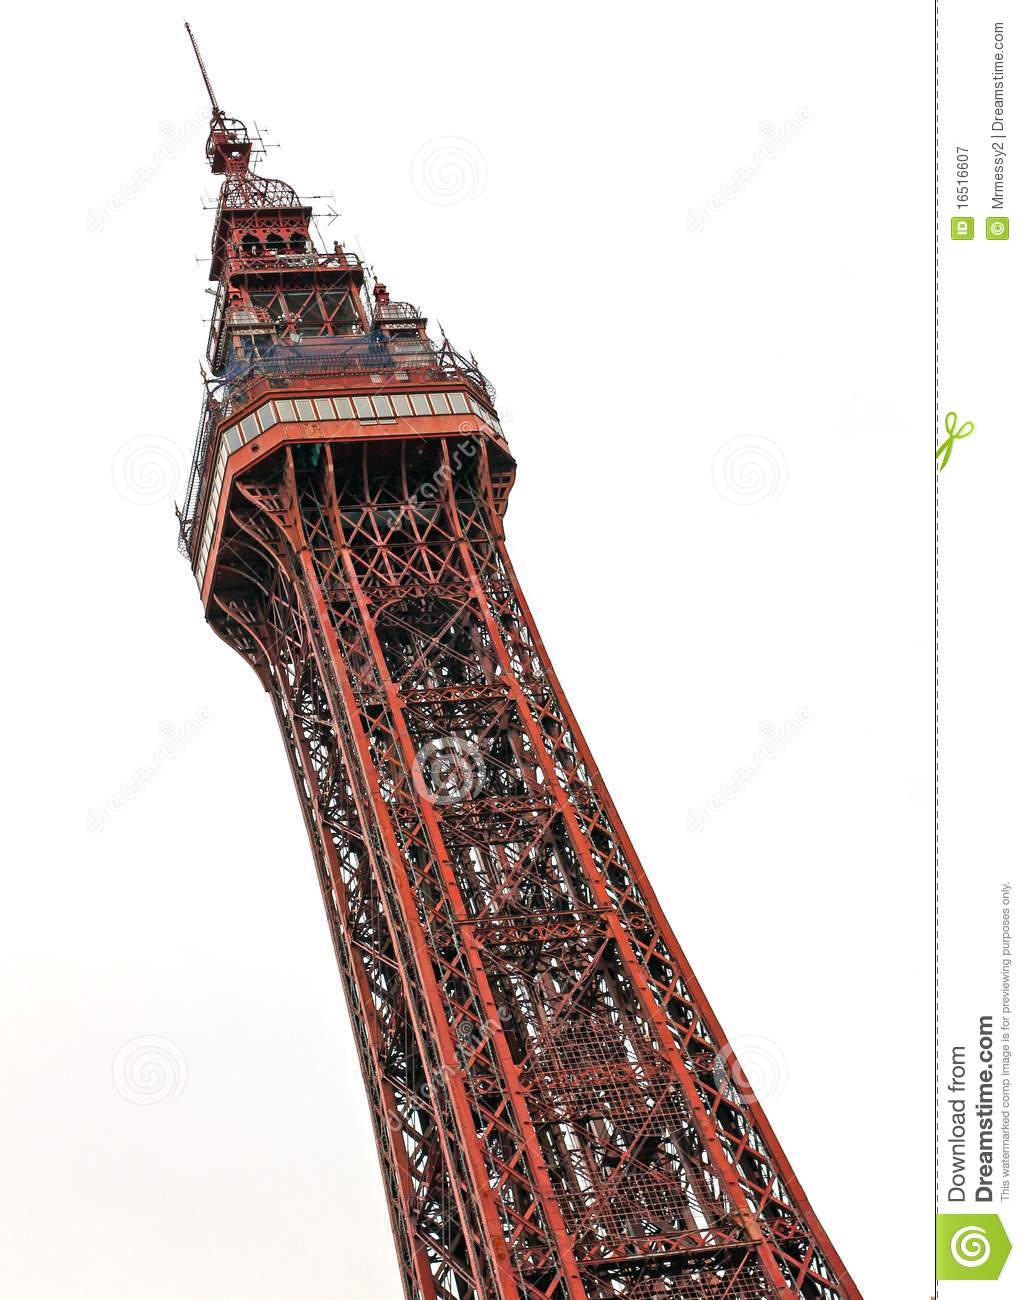 Blackpool Tower Royalty Free Stock Photography.